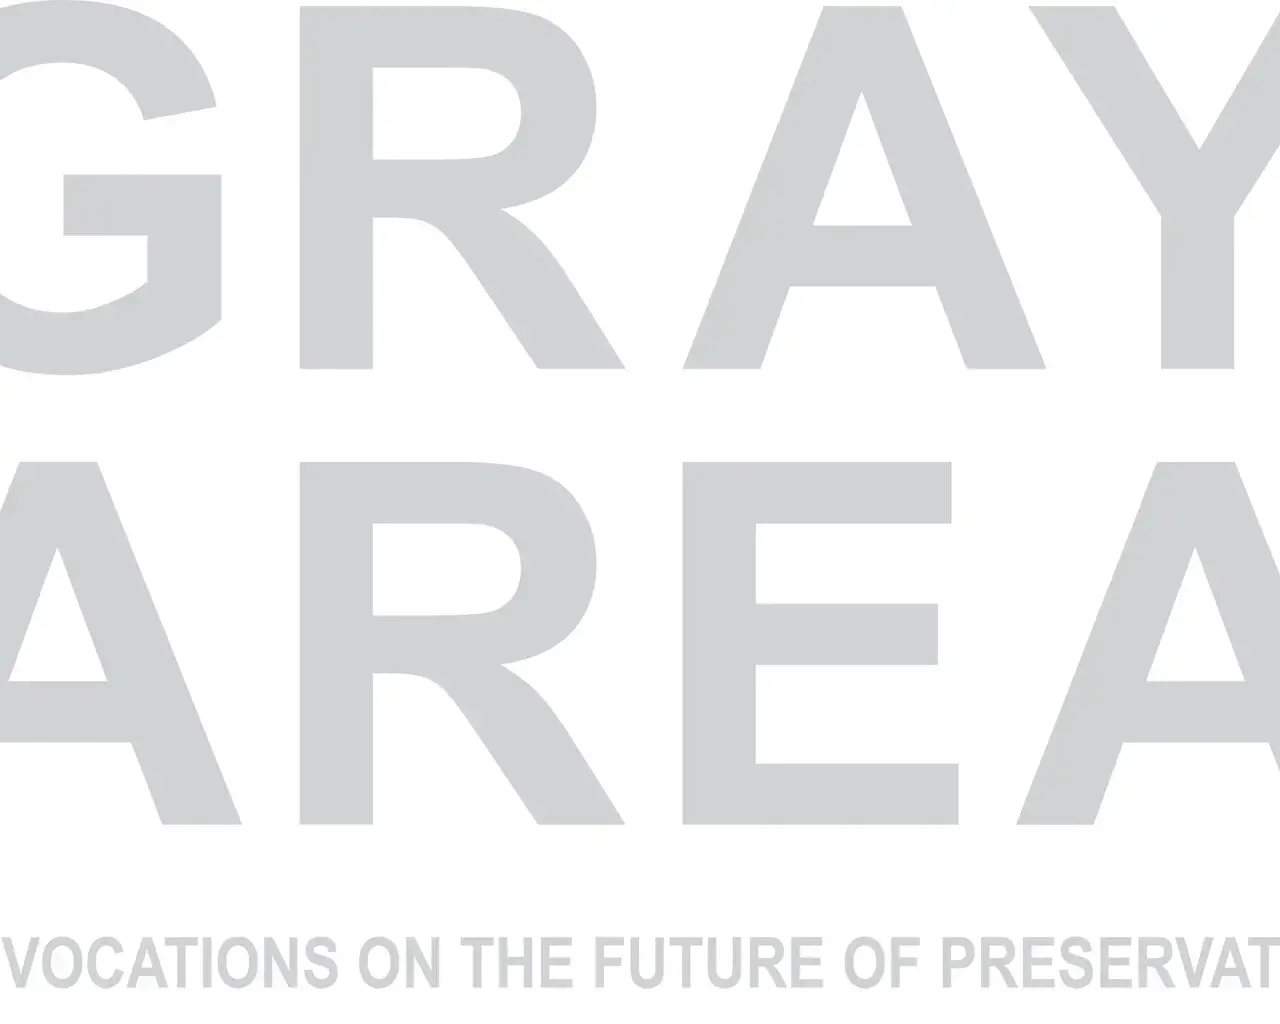 Title page of the limited-edition catalog Gray Area: Provocations on the Future of Preservation, produced by Gray Area, part of DesignPhiladelphia, with support from The Pew Center for Arts &amp; Heritage in 2011.